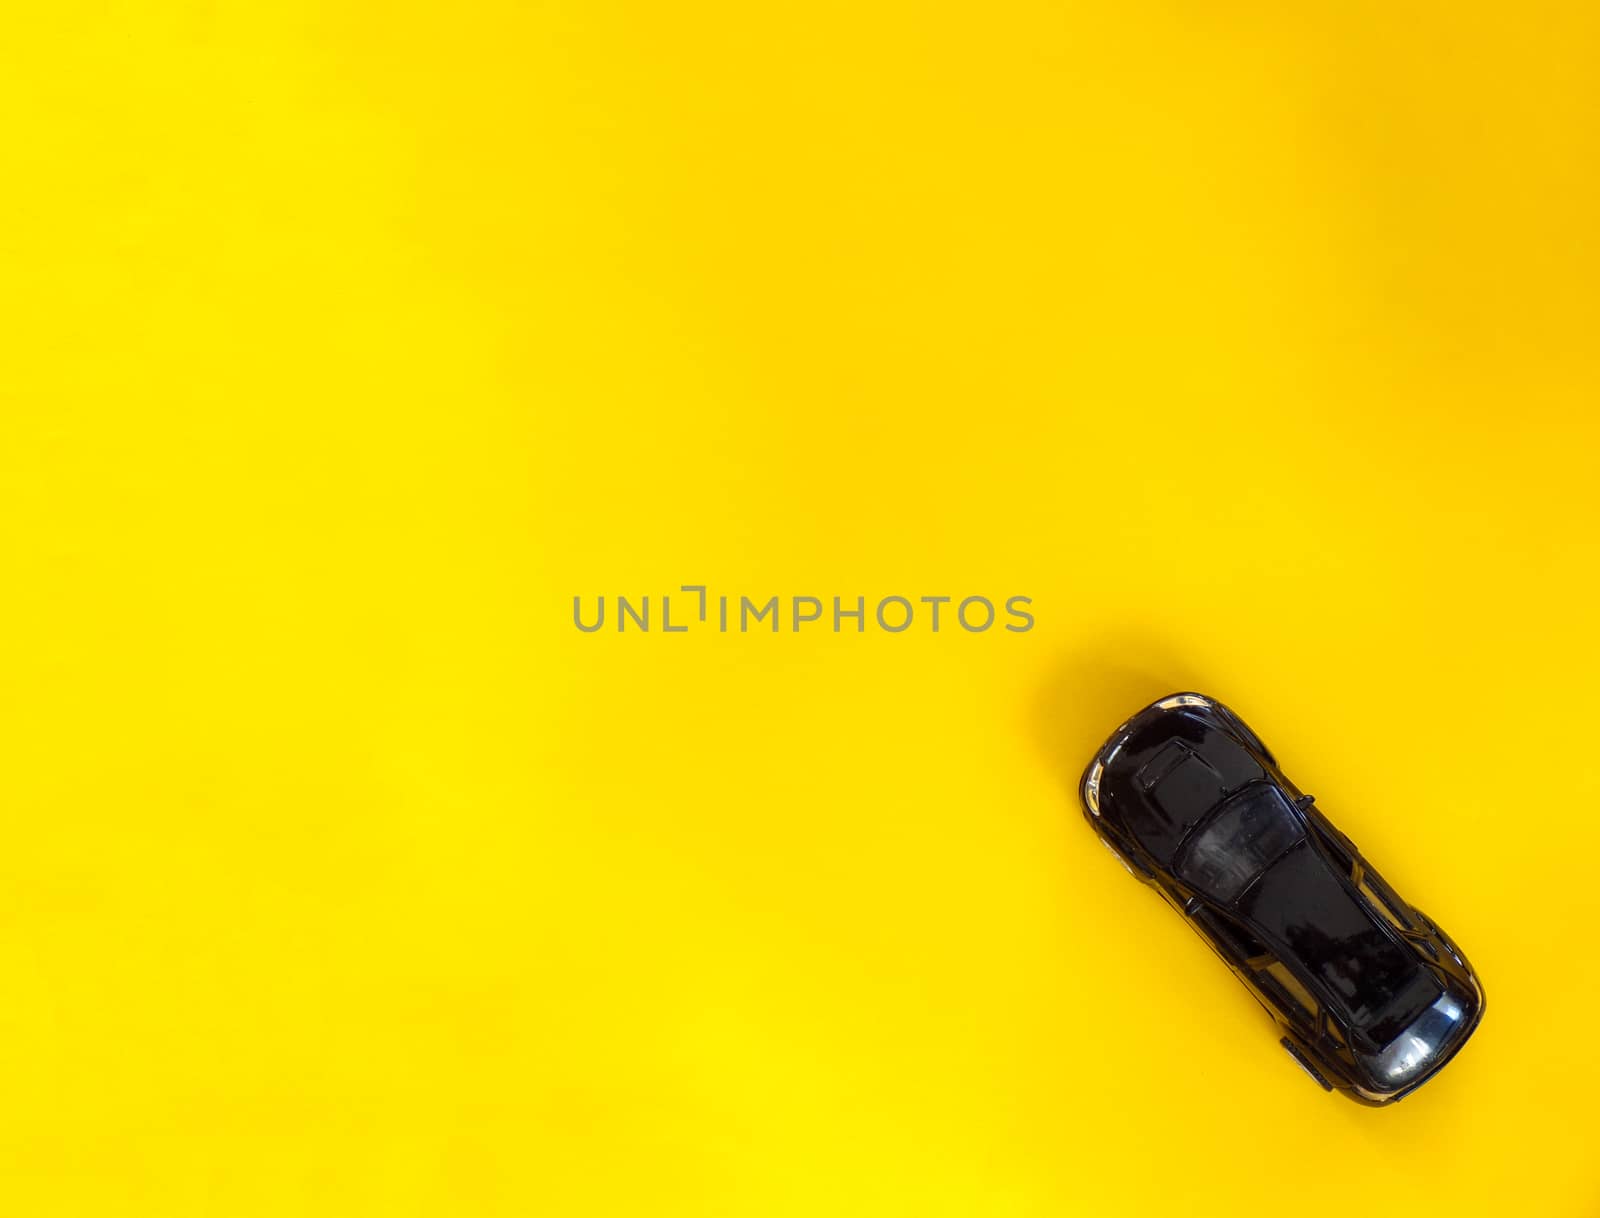 Children's toy car on a yellow background with copying space.